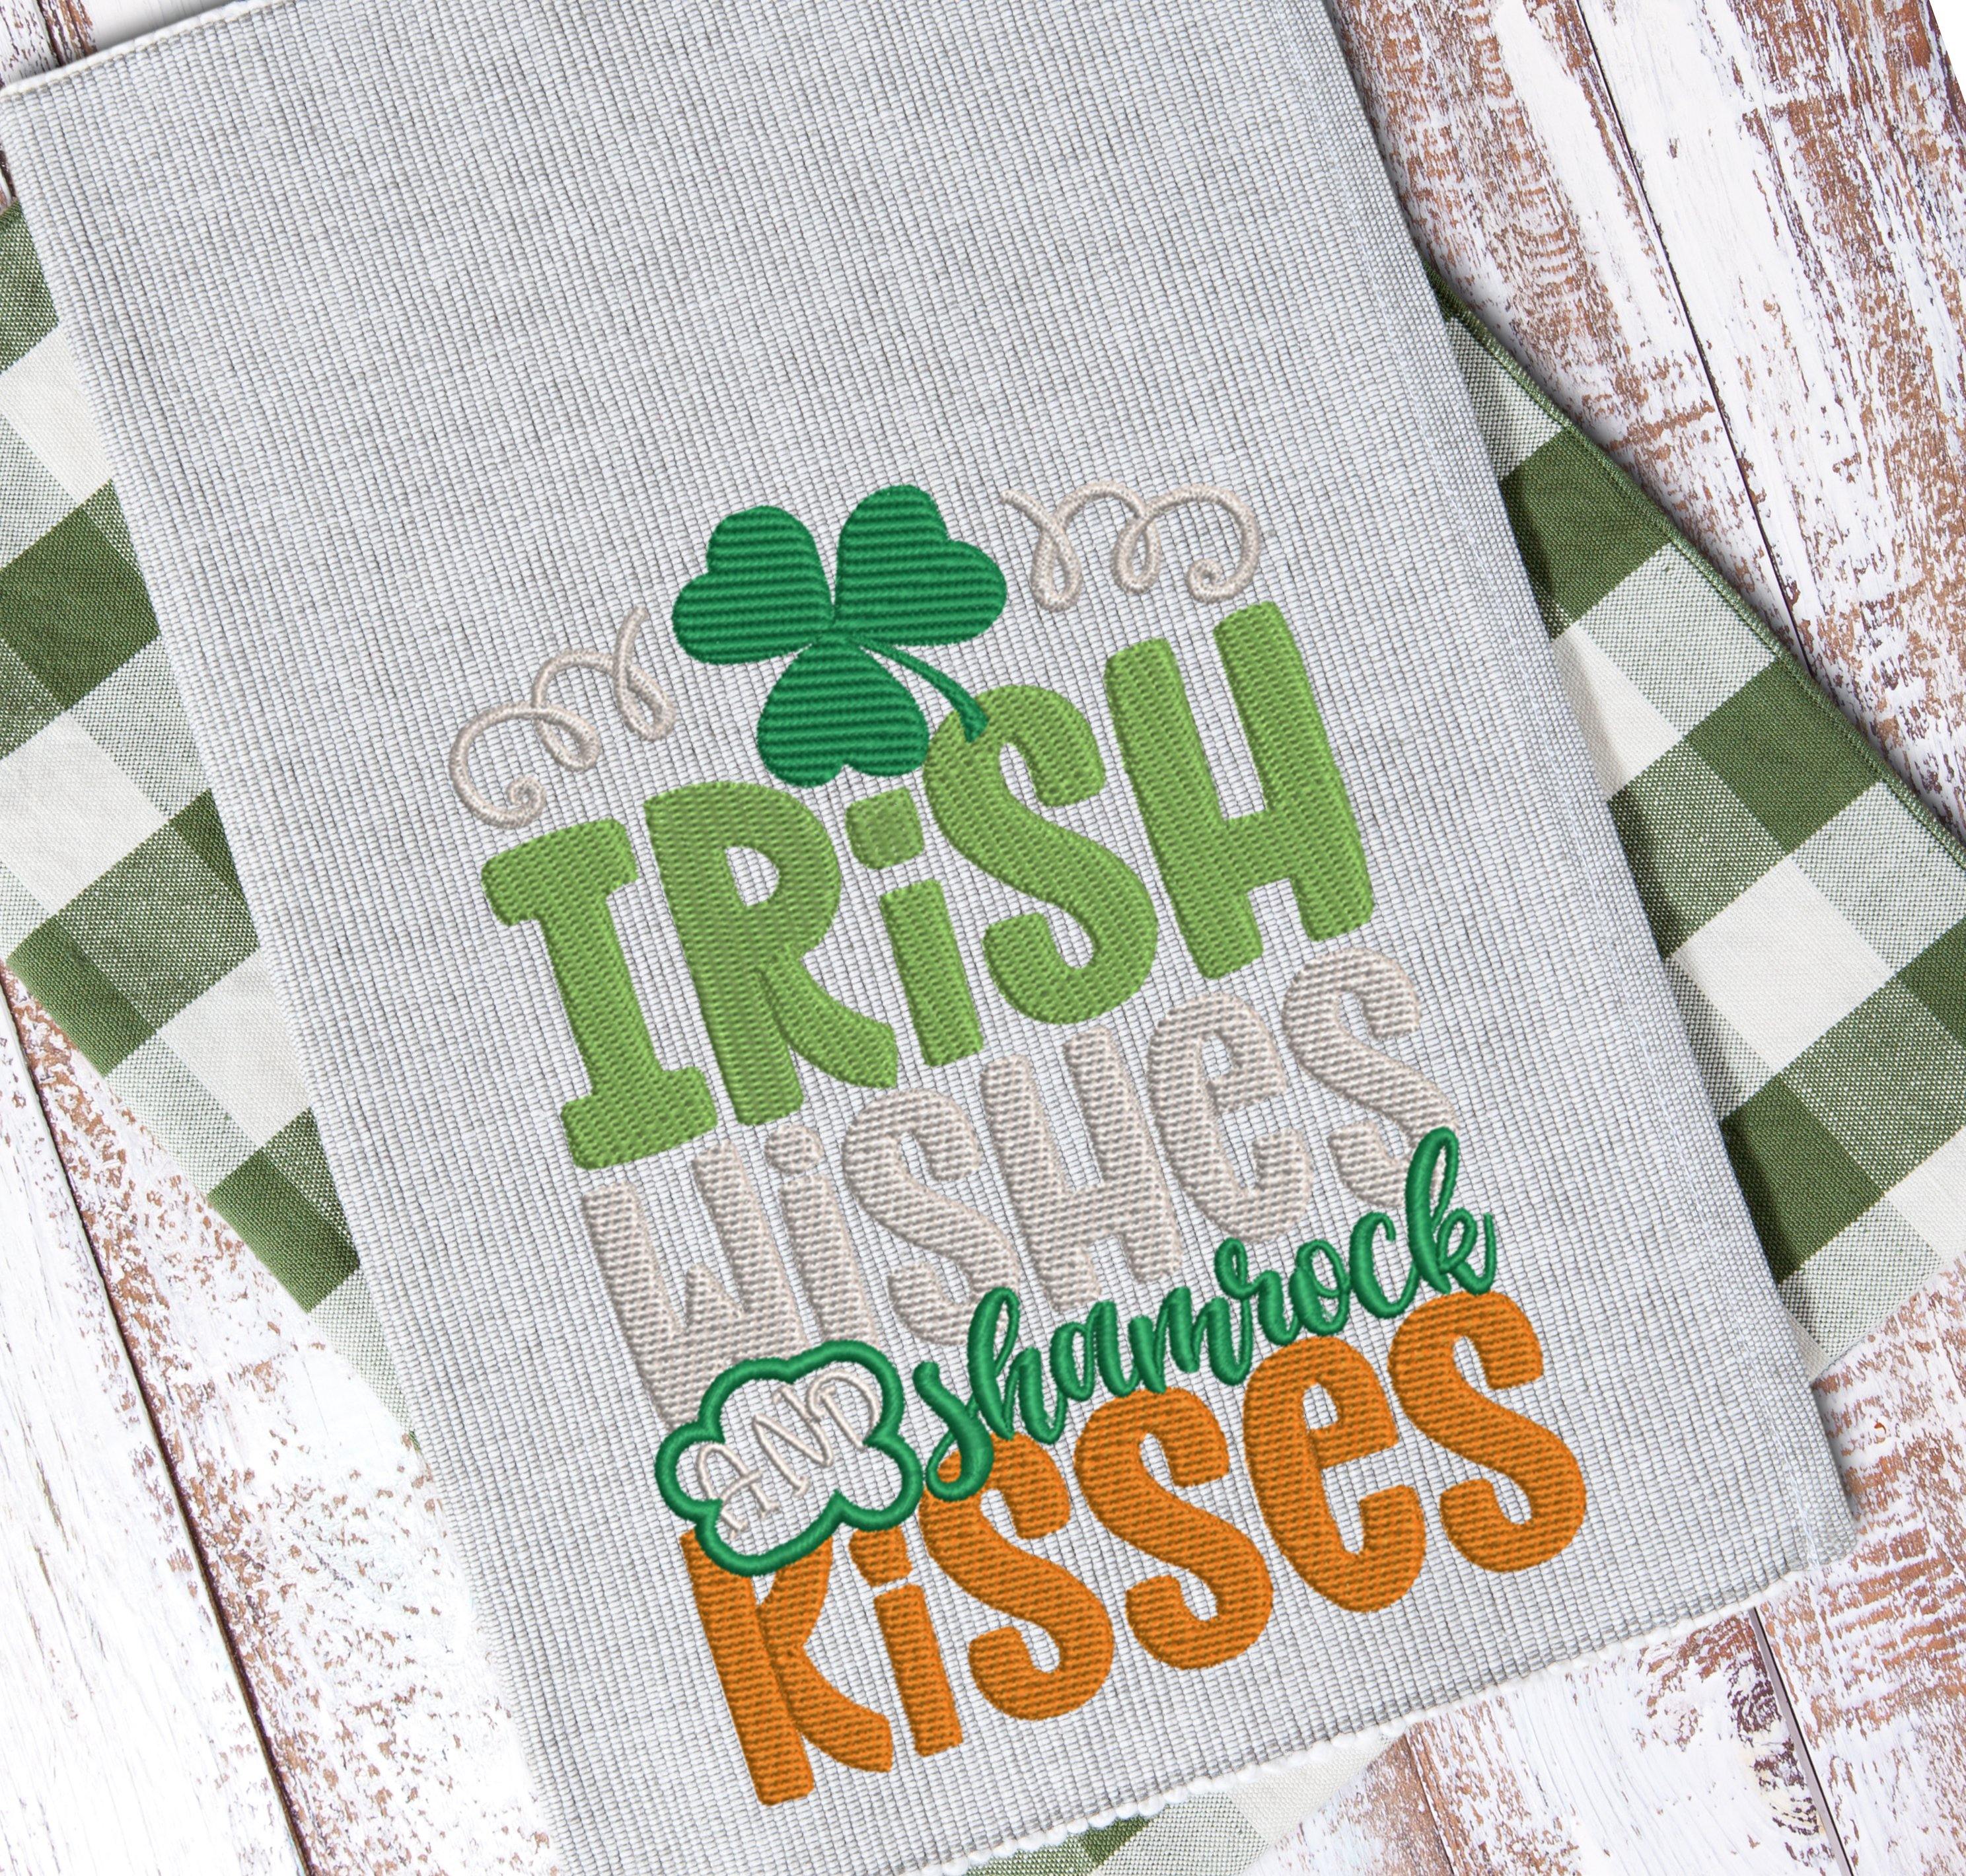 Irish Wishes Shamrock Kisses Embroidery Design - Oh My Crafty Supplies Inc.